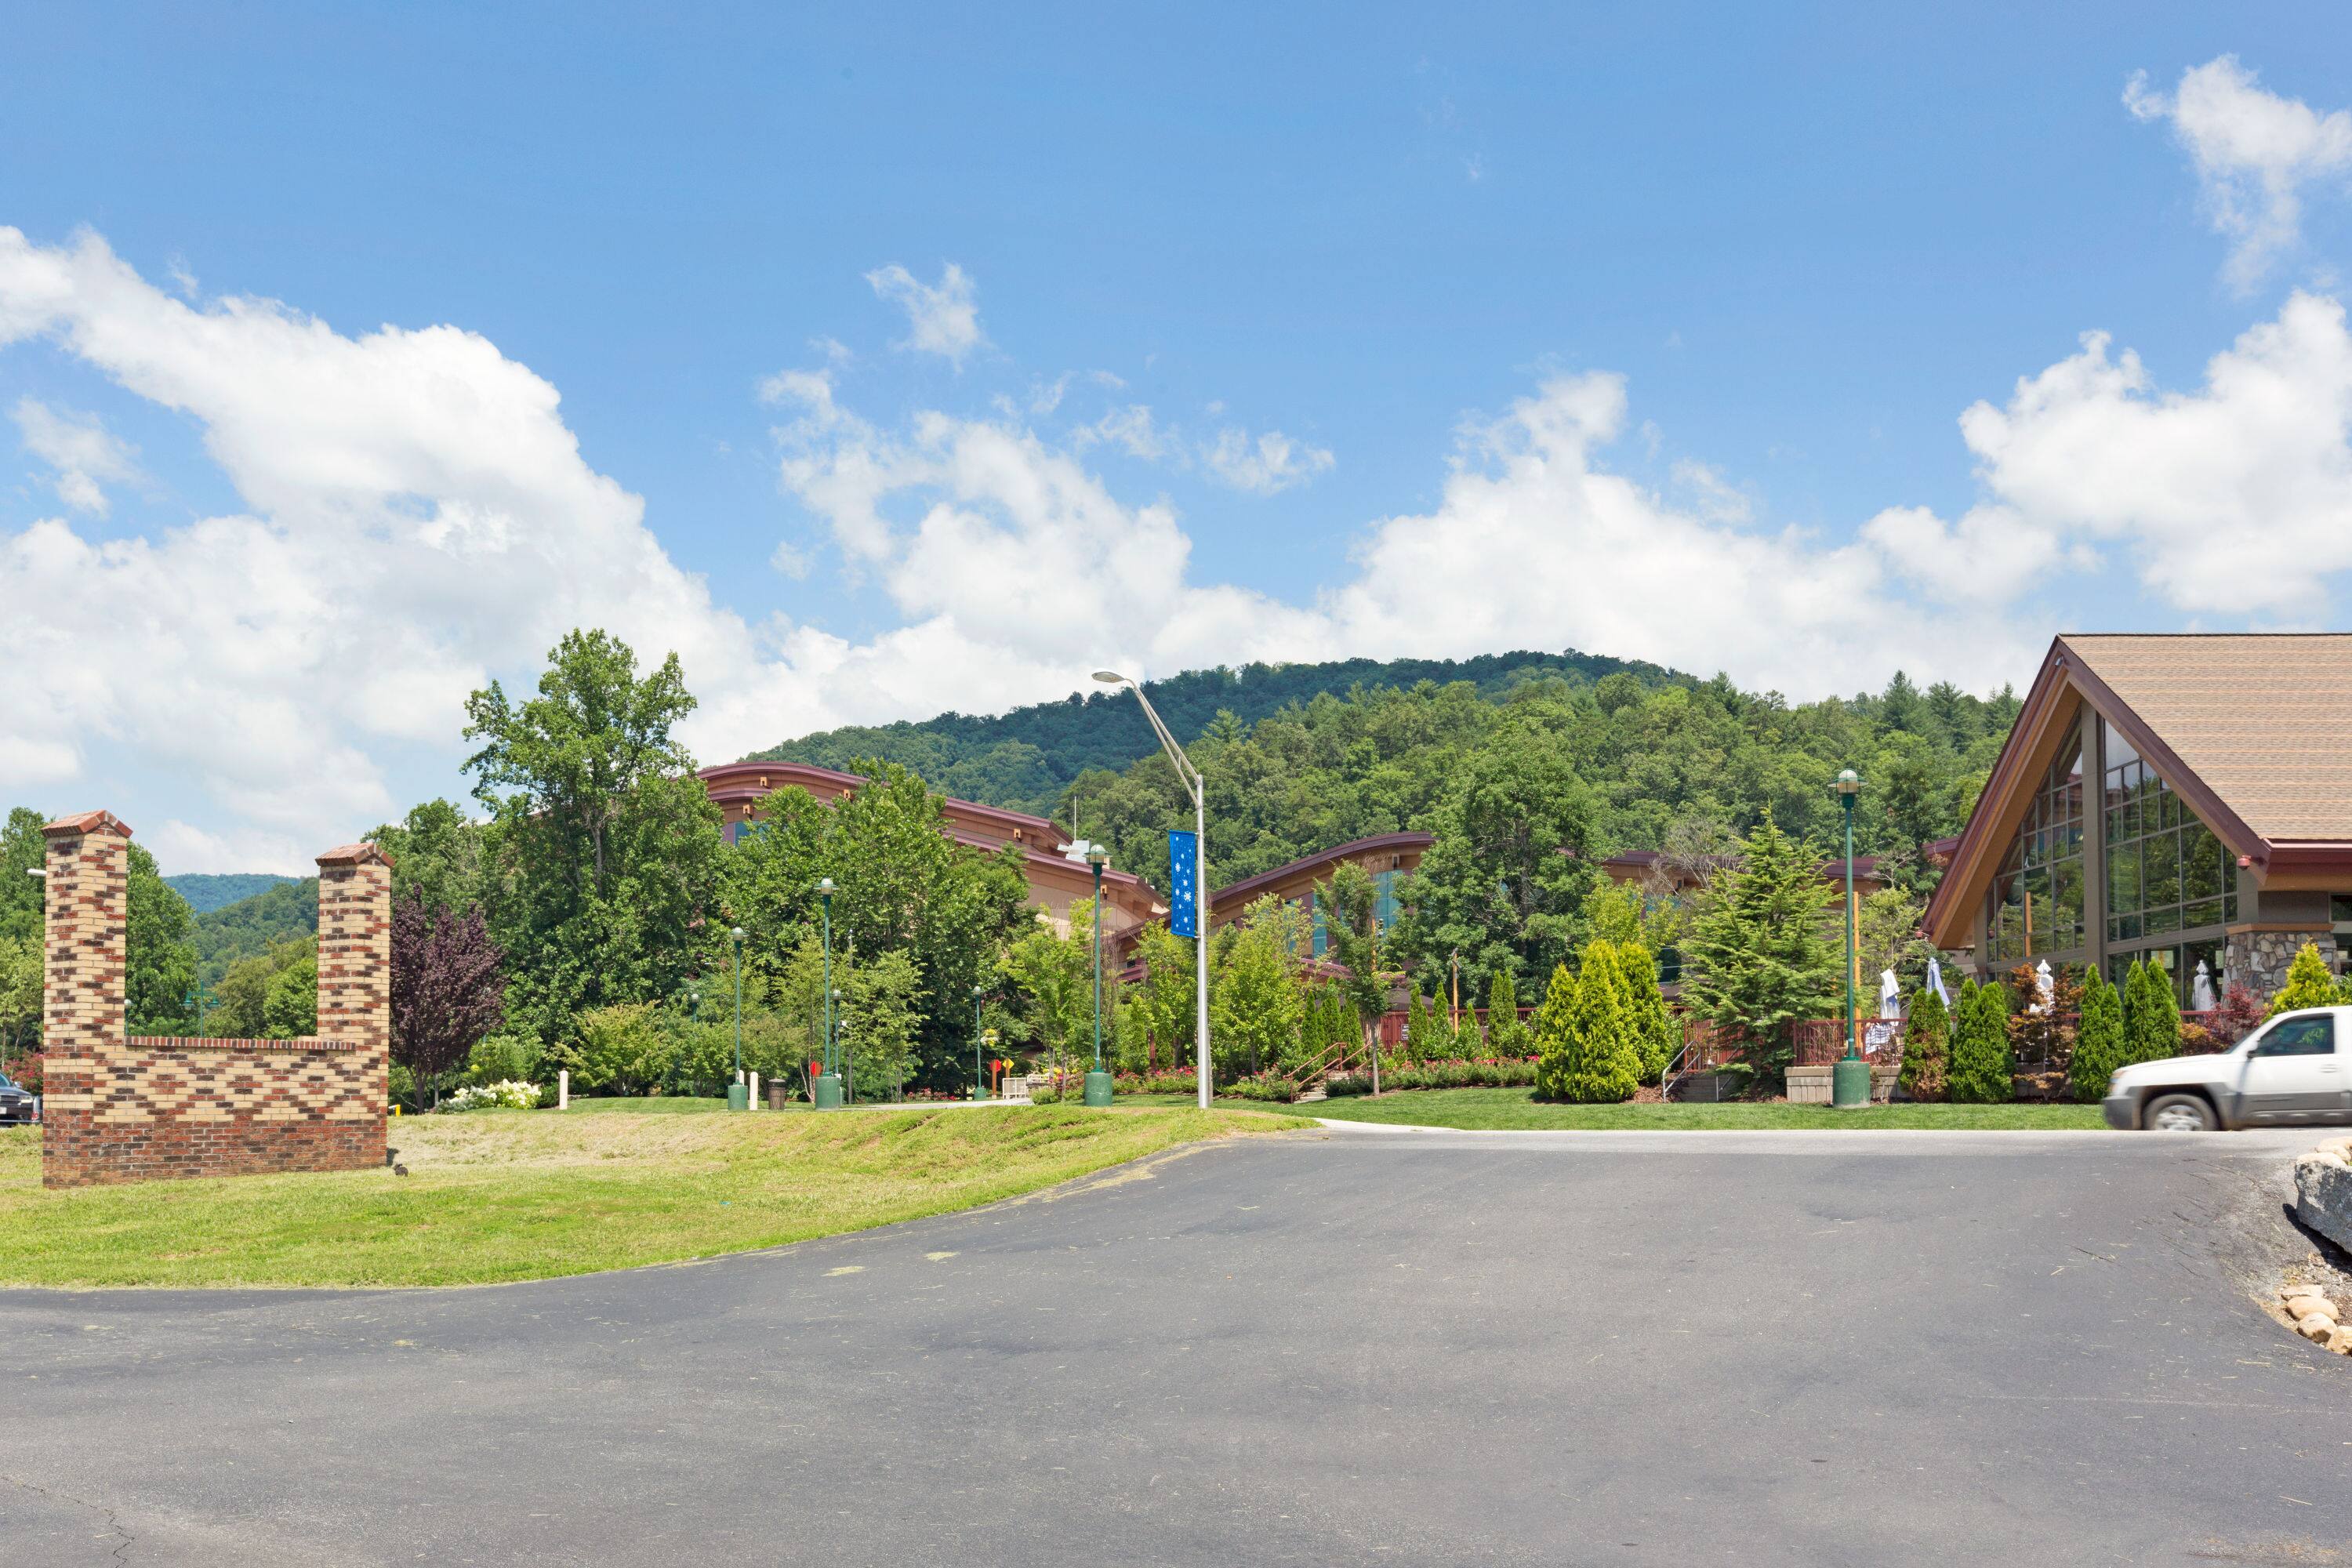 hotels on casino trail in cherokee nc